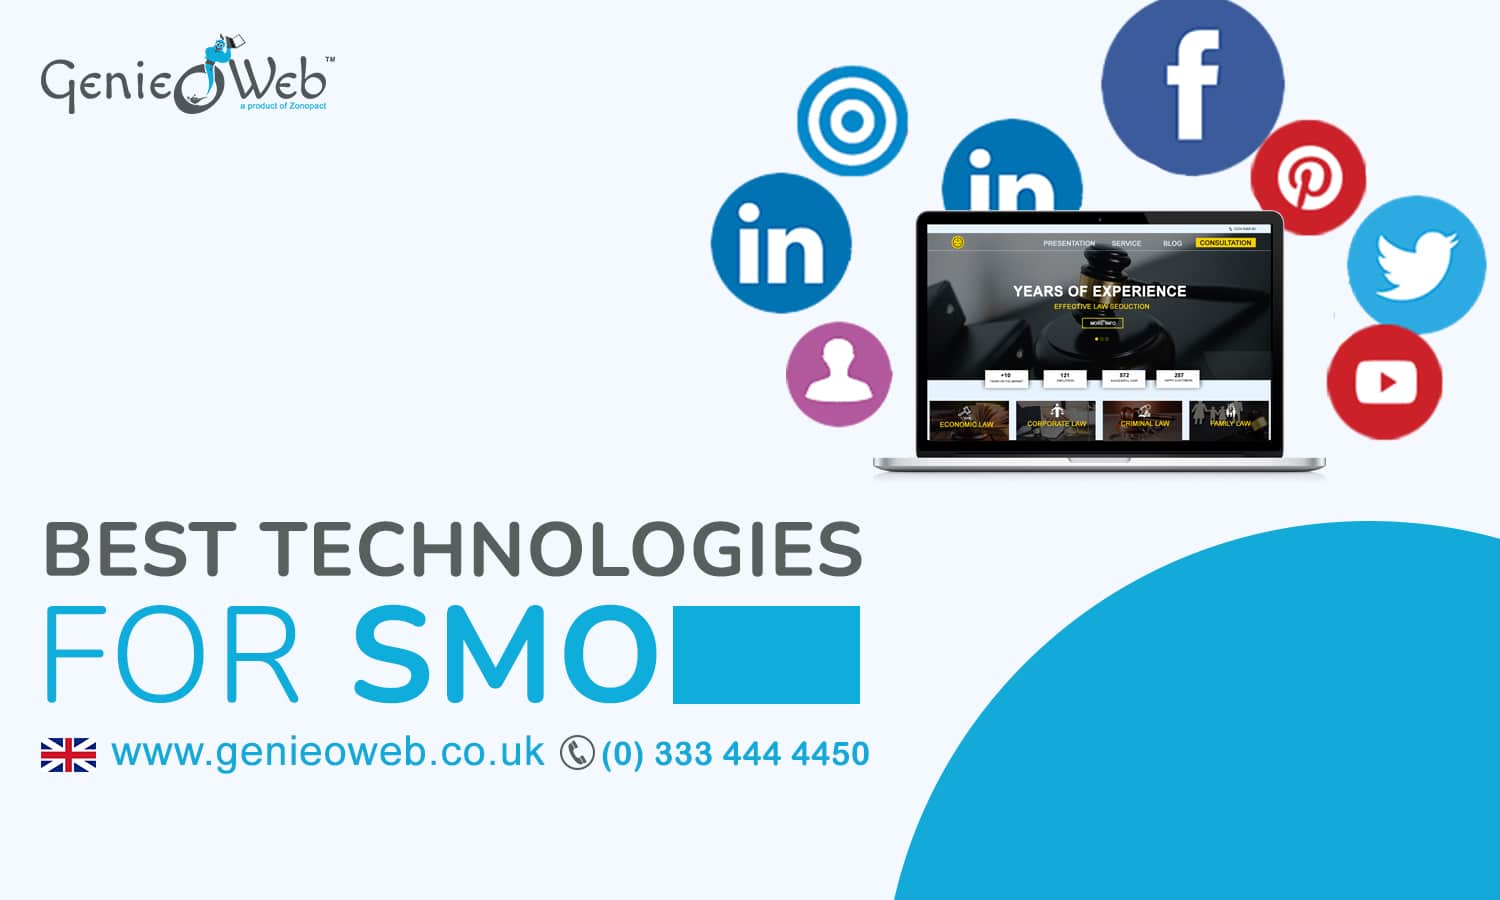 Best technologies for SMO